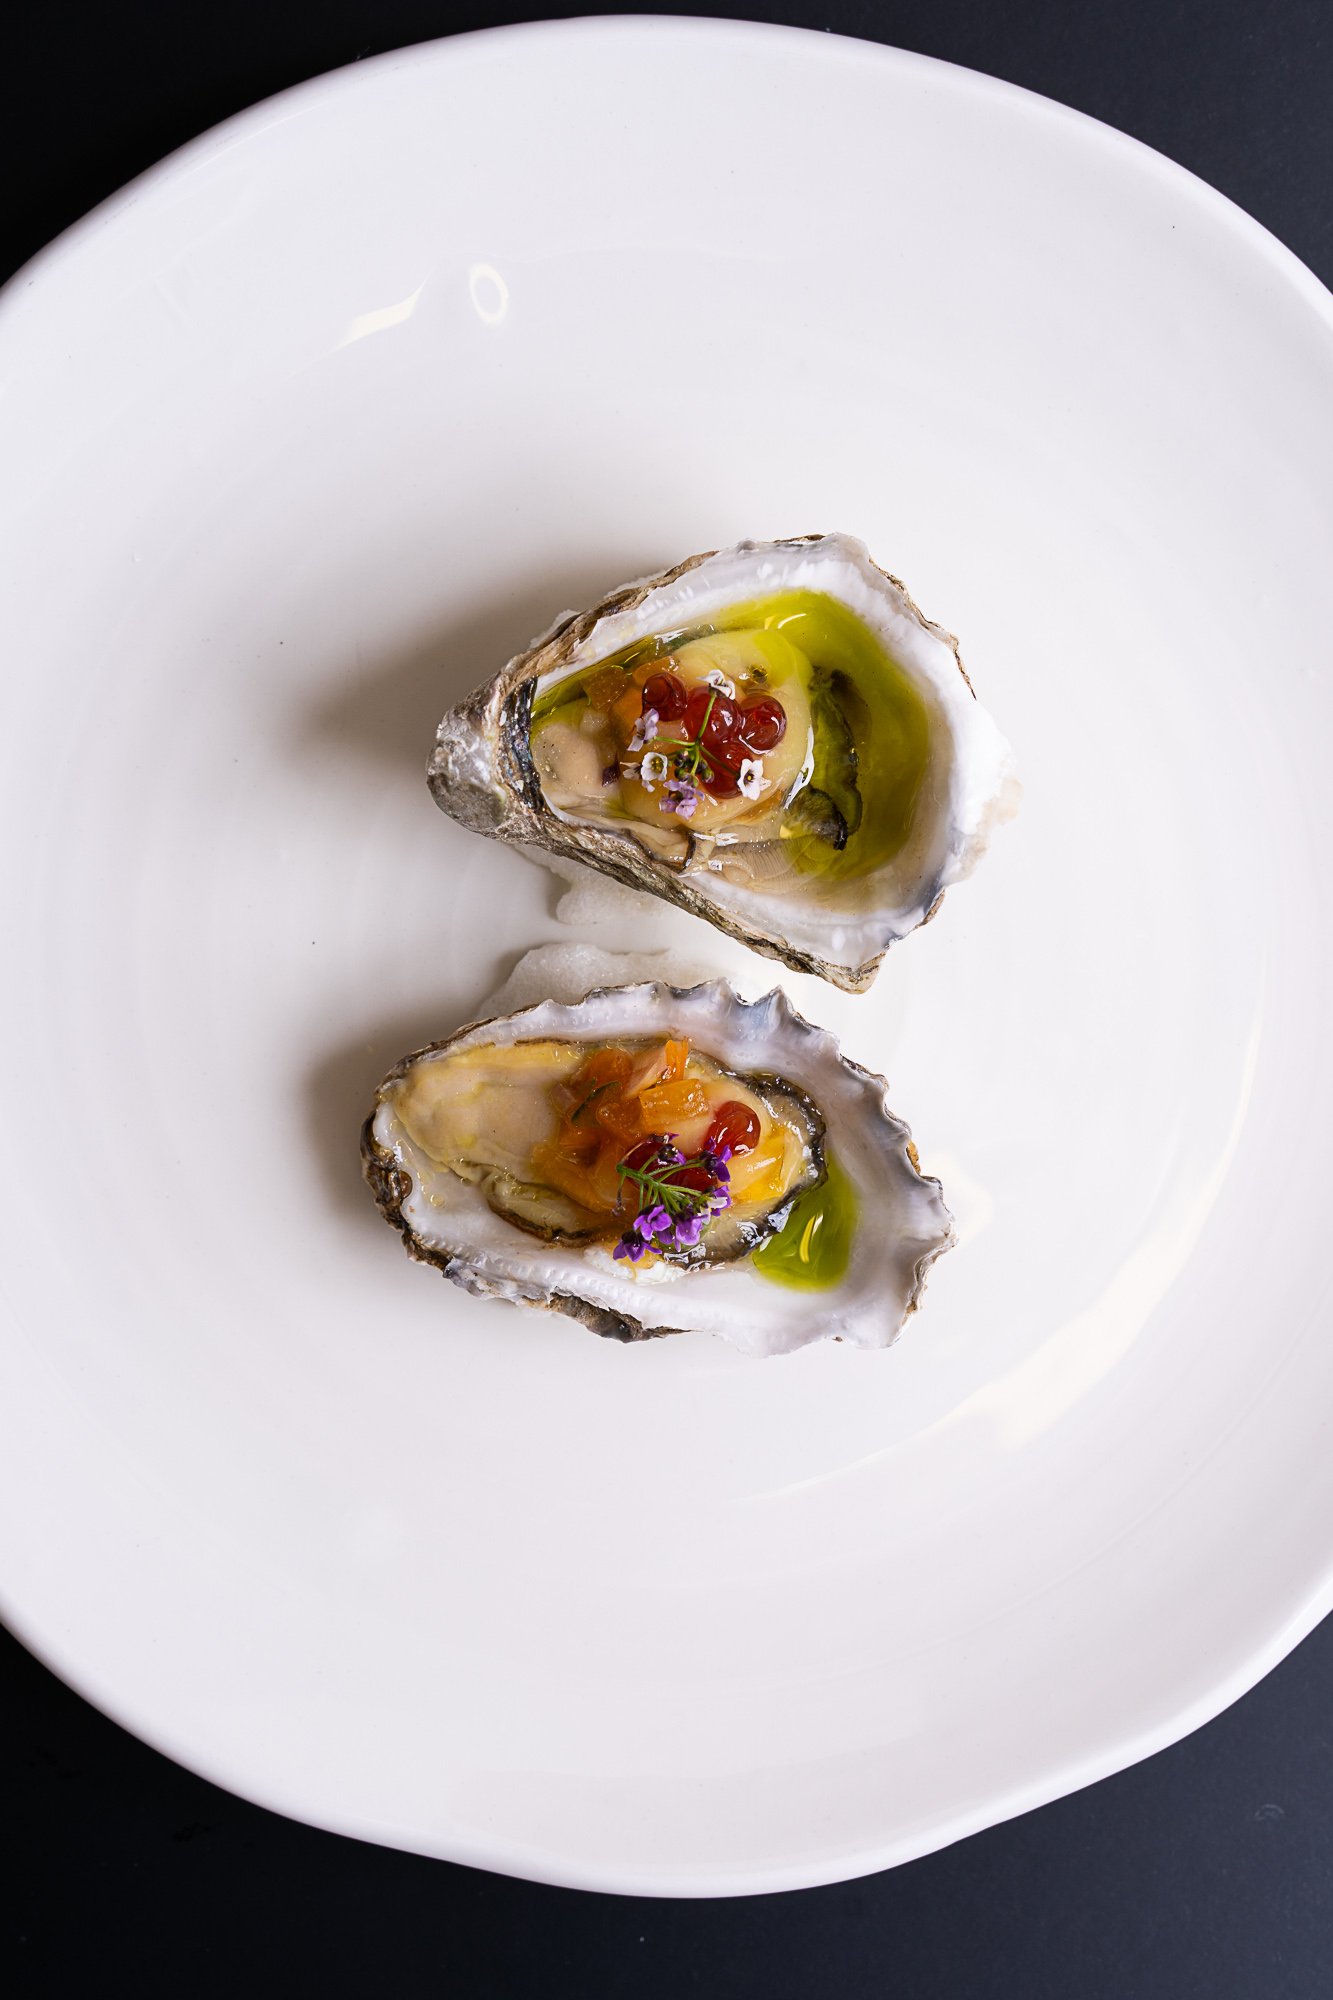 Ostrica con mela - oysters with persimmon, chili and avruga caviar, LBP&S.jpg